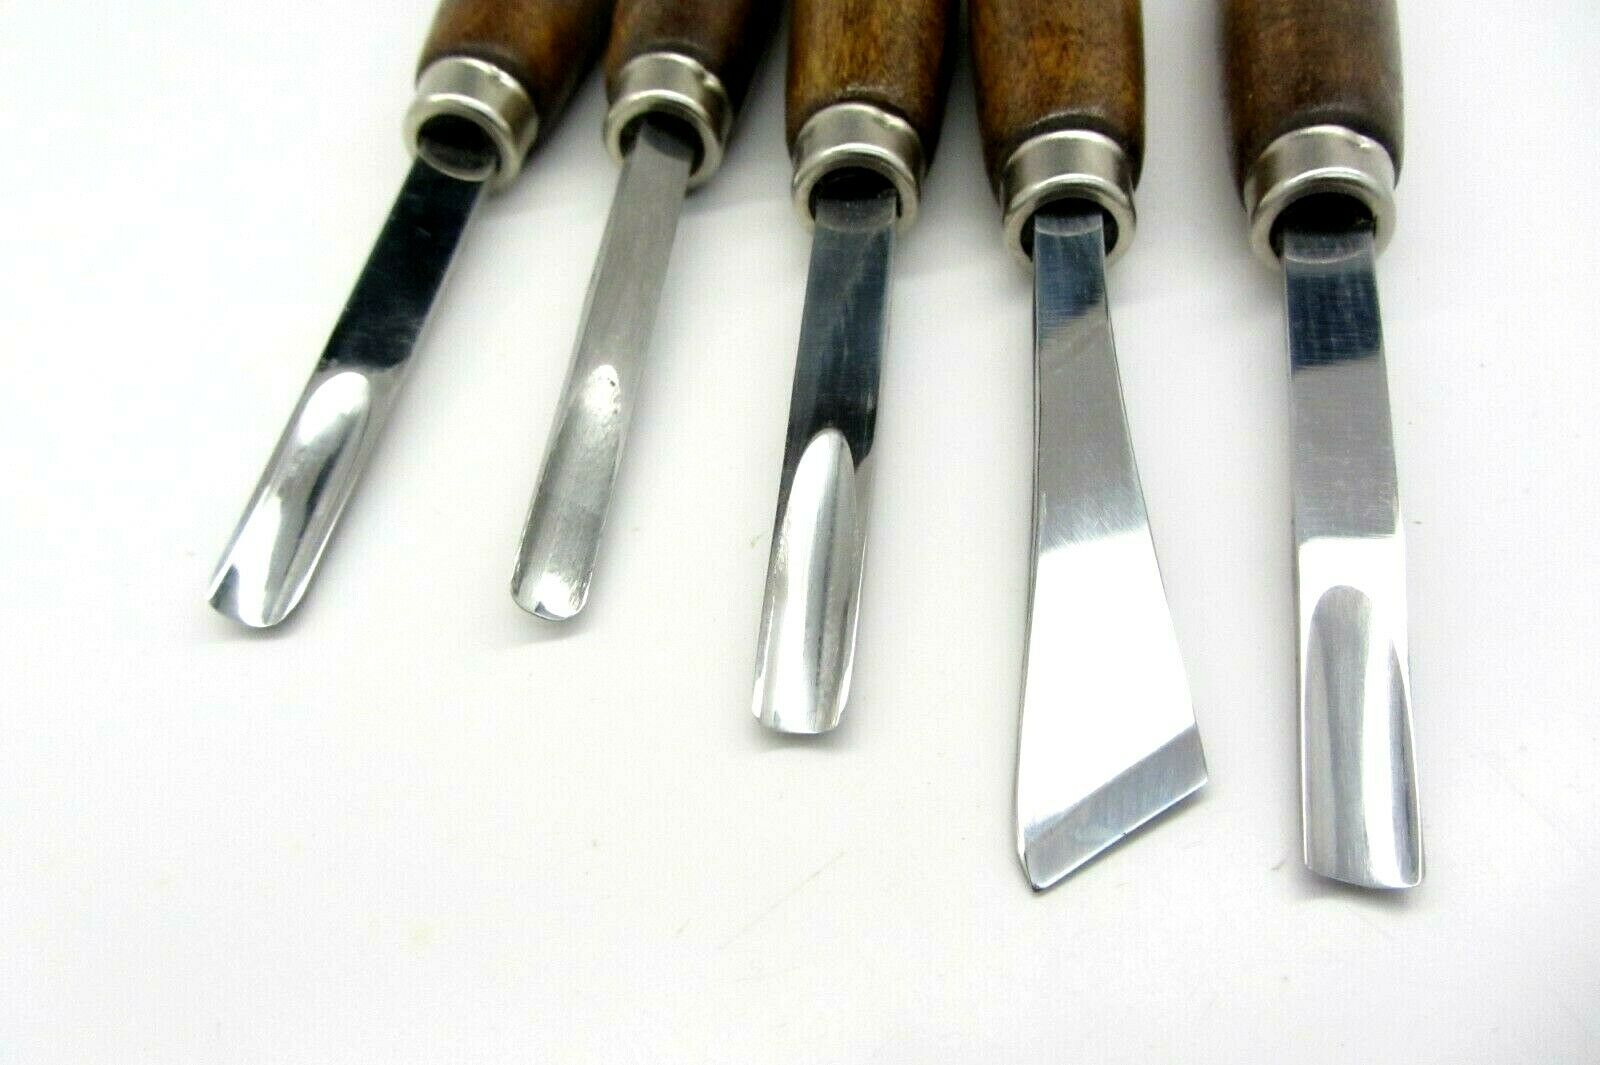 Ramelson Basic Wood Carving Chisels Gouge Tool Set 6pc Woodworking Shop